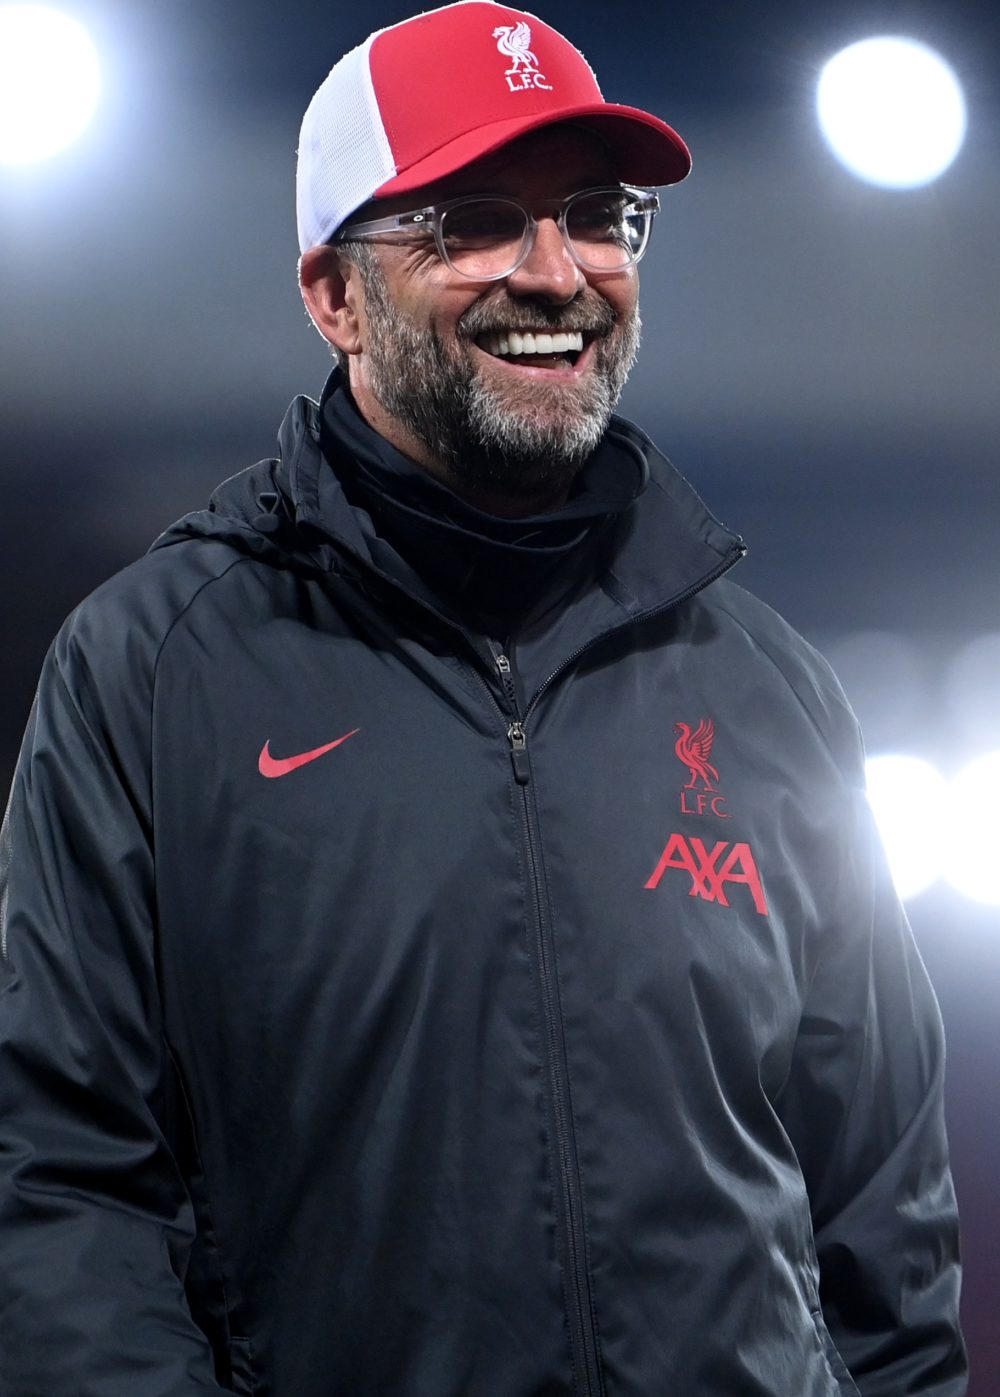 LIVERPOOL, ENGLAND - SEPTEMBER 28: Jurgen Klopp, Manager of Liverpool reacts following his sides victory in the Premier League match between Liverpool and Arsenal at Anfield on September 28, 2020 in Liverpool, England. Sporting stadiums around the UK remain under strict restrictions due to the Coronavirus Pandemic as Government social distancing laws prohibit fans inside venues resulting in games being played behind closed doors. (Photo by Laurence Griffiths/Getty Images)